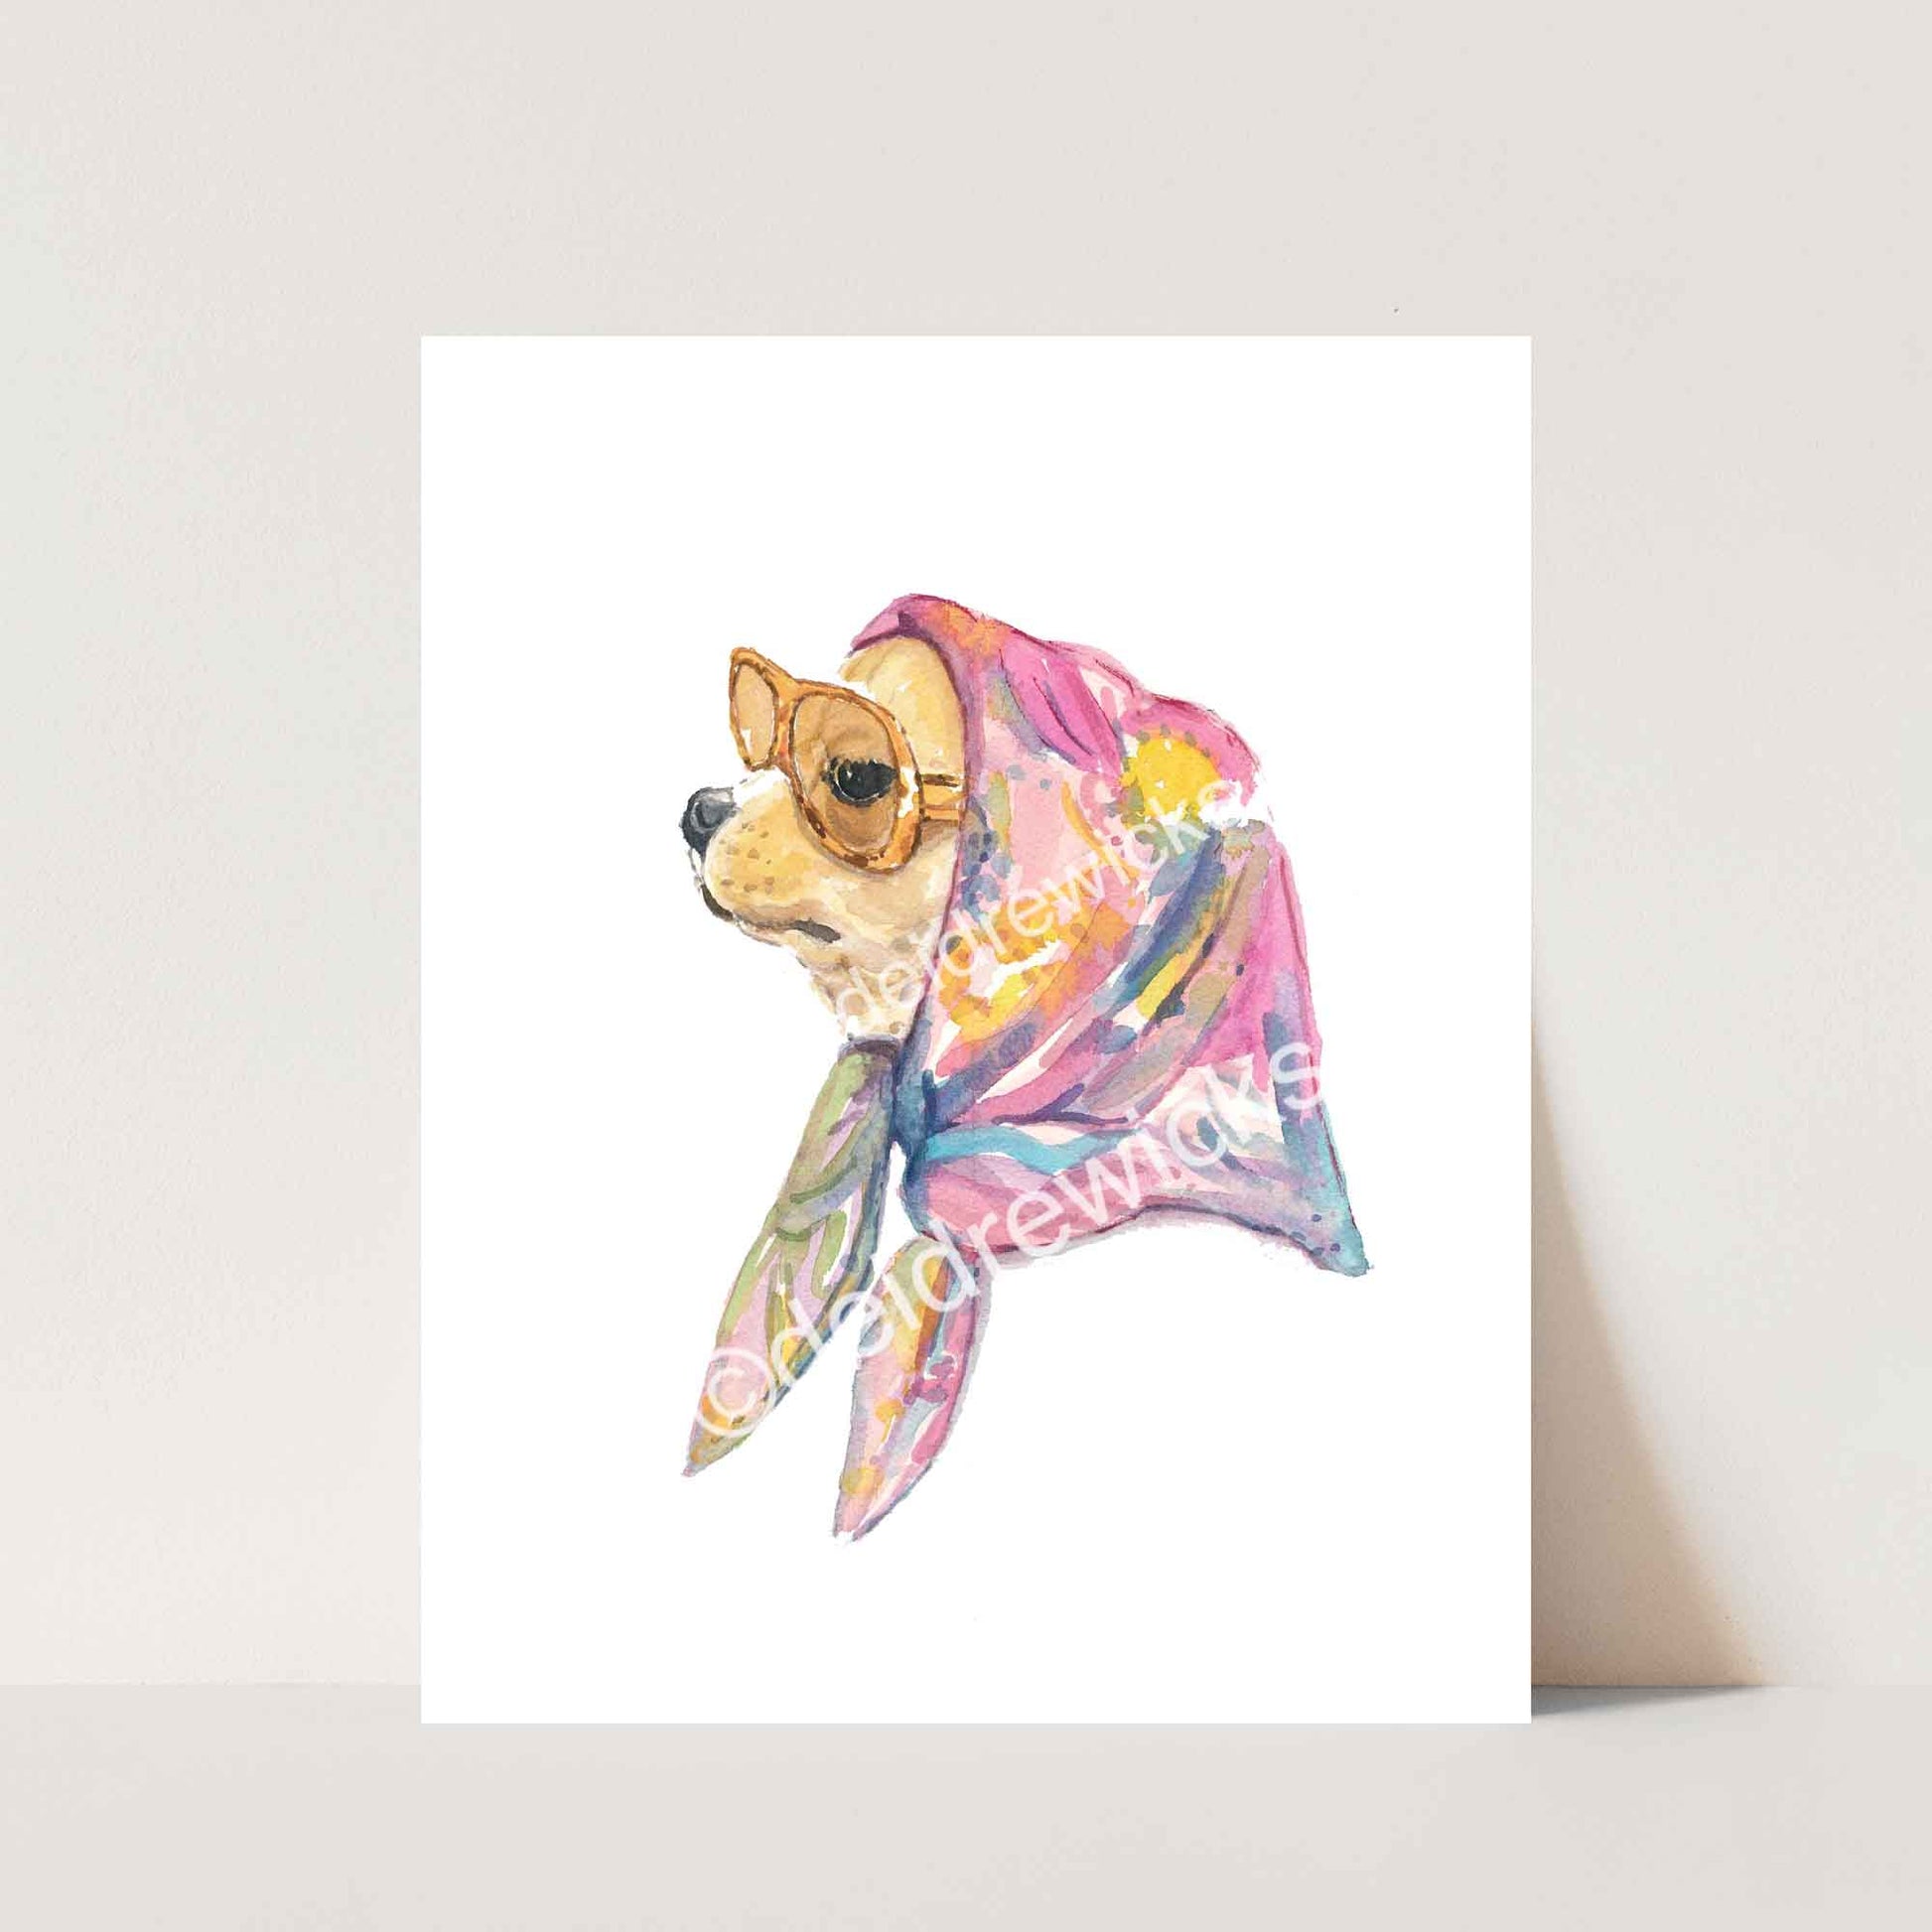 Watercolor painting print of a chic vintage style chihuahua dog